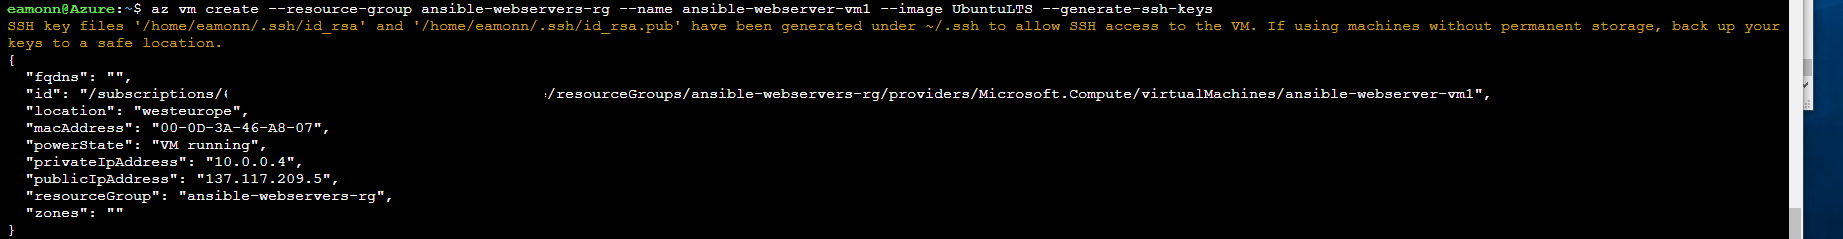 Screenshot of Azure Cloud Shell command prompt window with Azure CLI commands for creating an Ubuntu vm, vm1, successfully completed